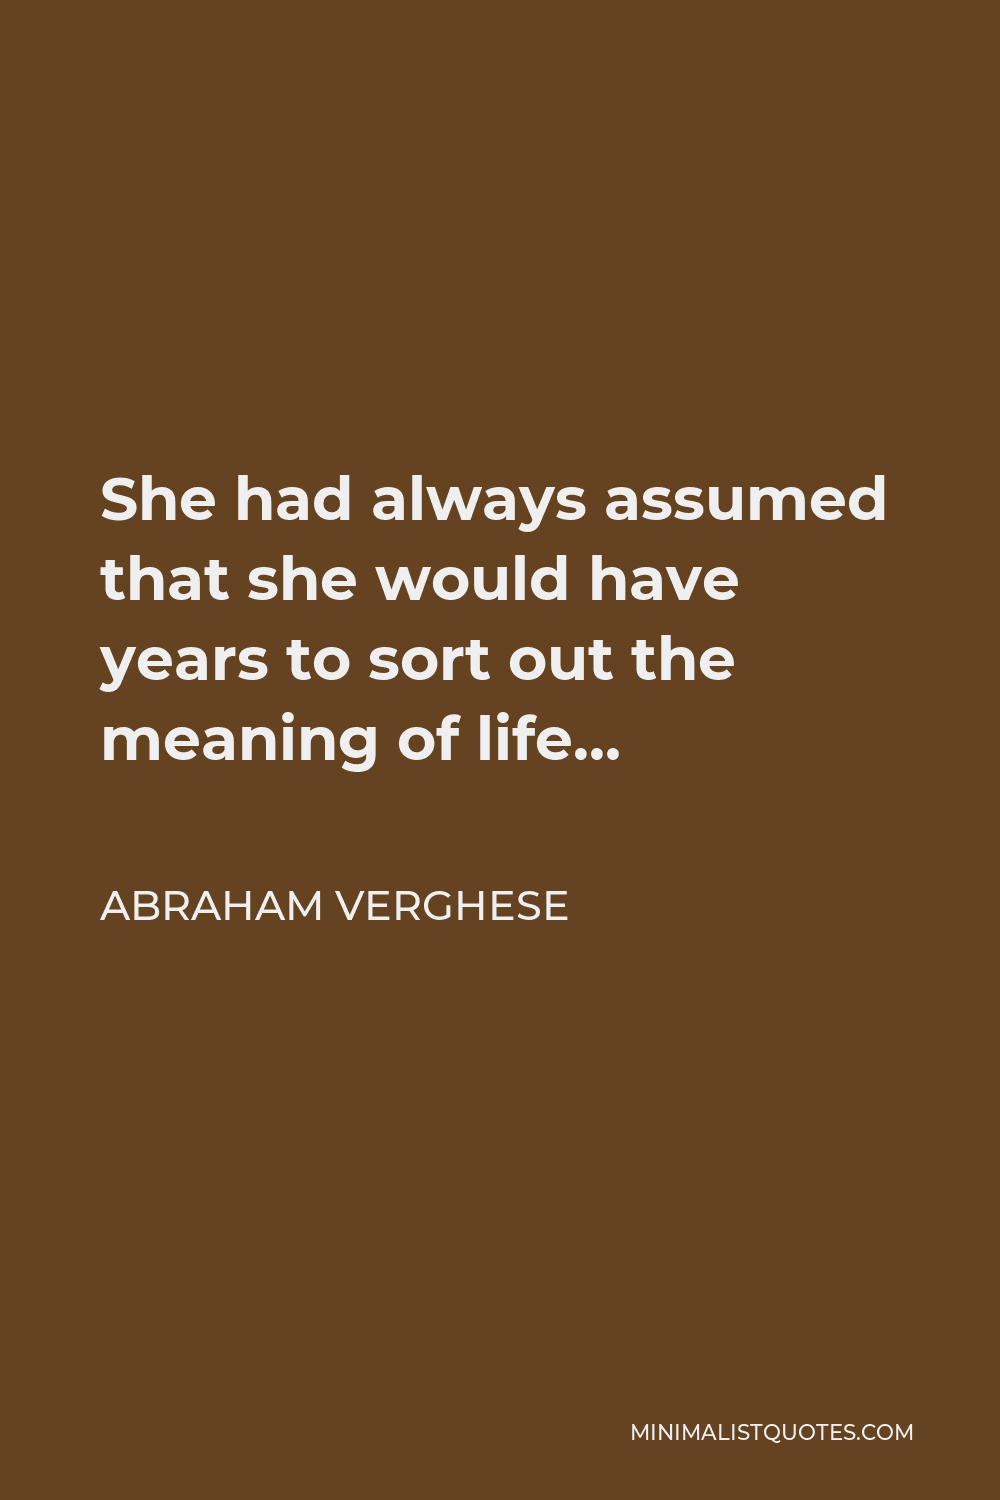 Abraham Verghese Quote - She had always assumed that she would have years to sort out the meaning of life…